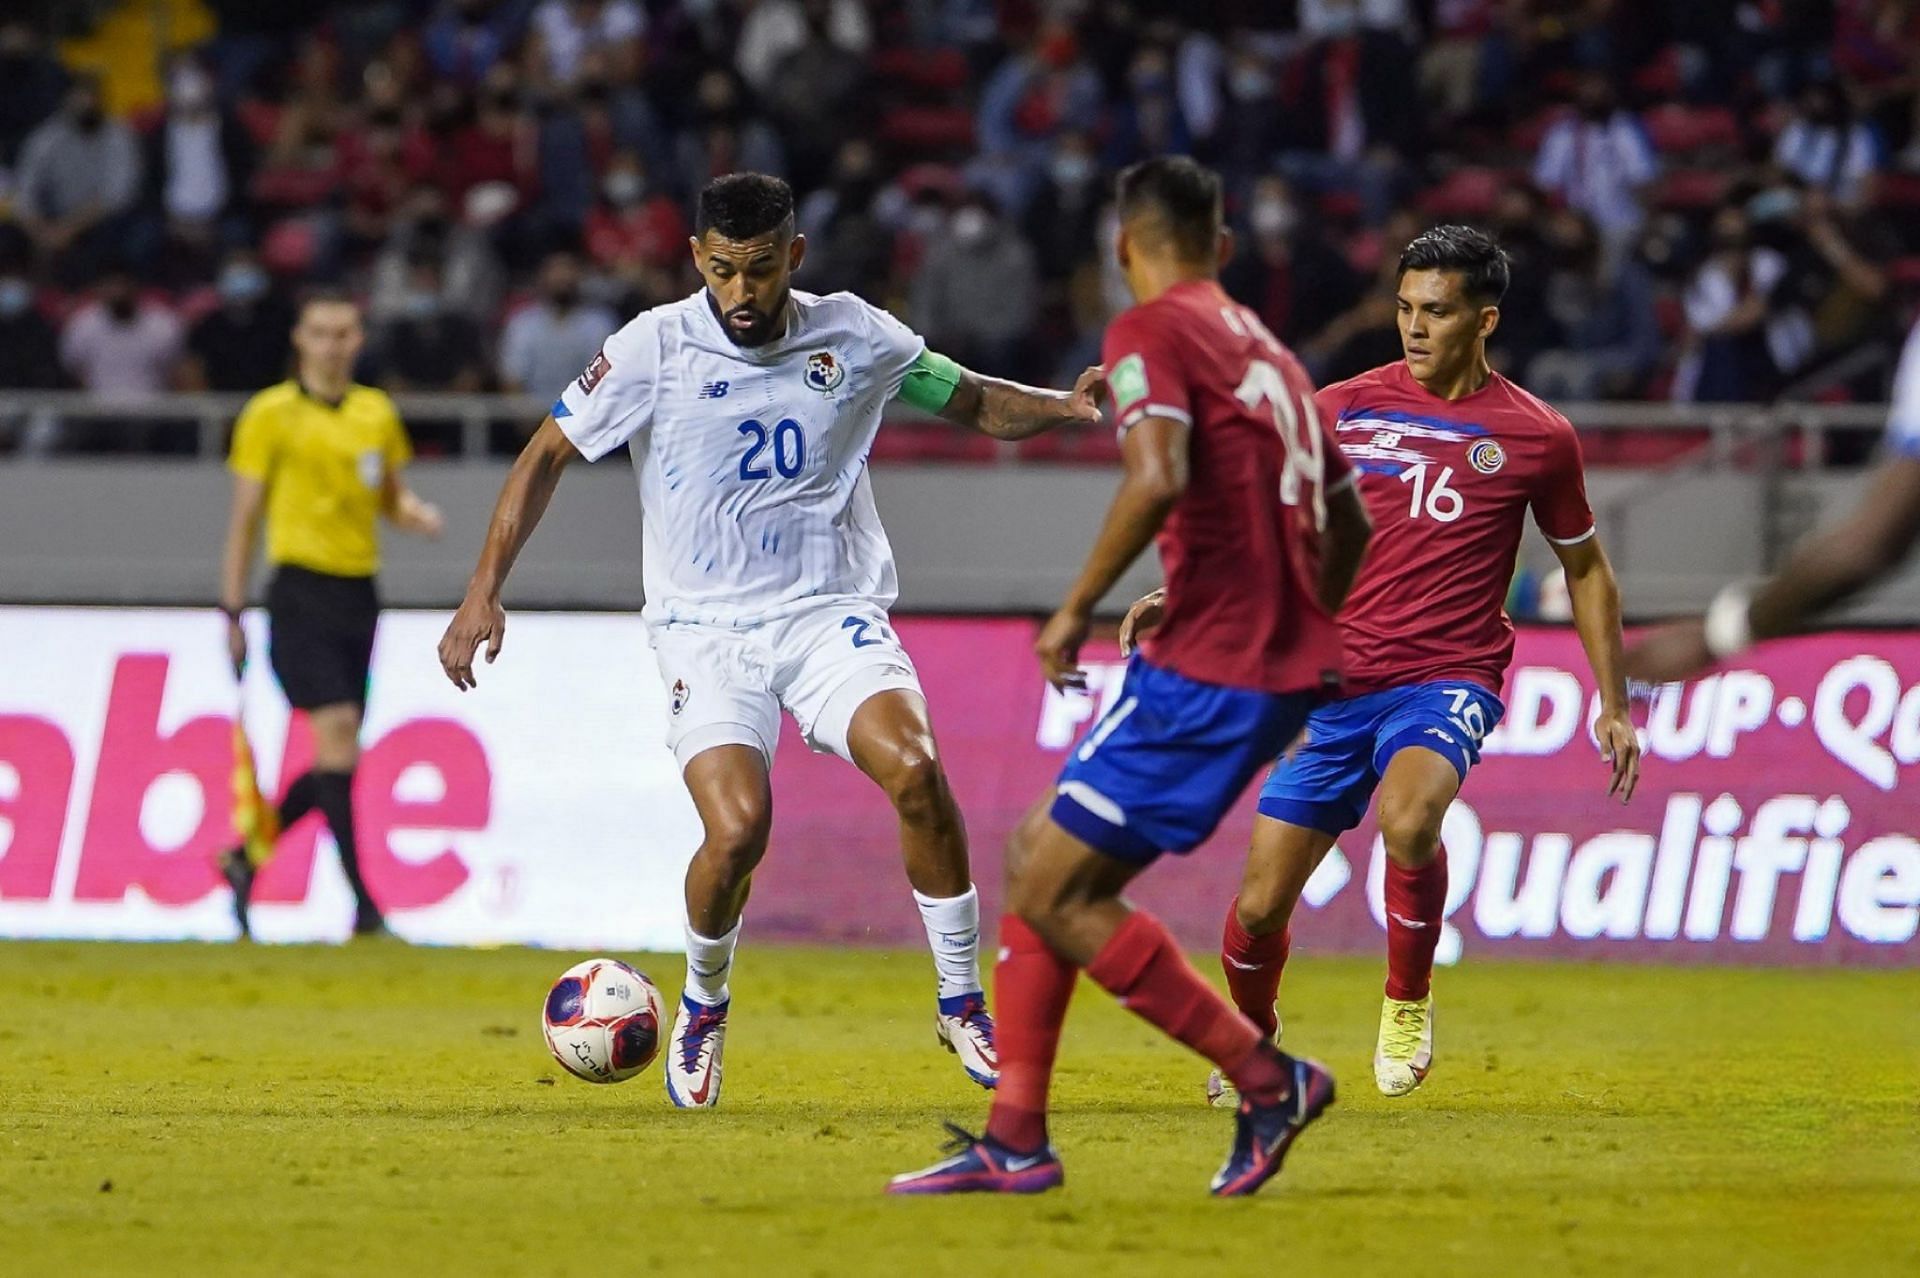 Panama and Costa Rica meet in their CONCACAF Nations League opener on Thursday